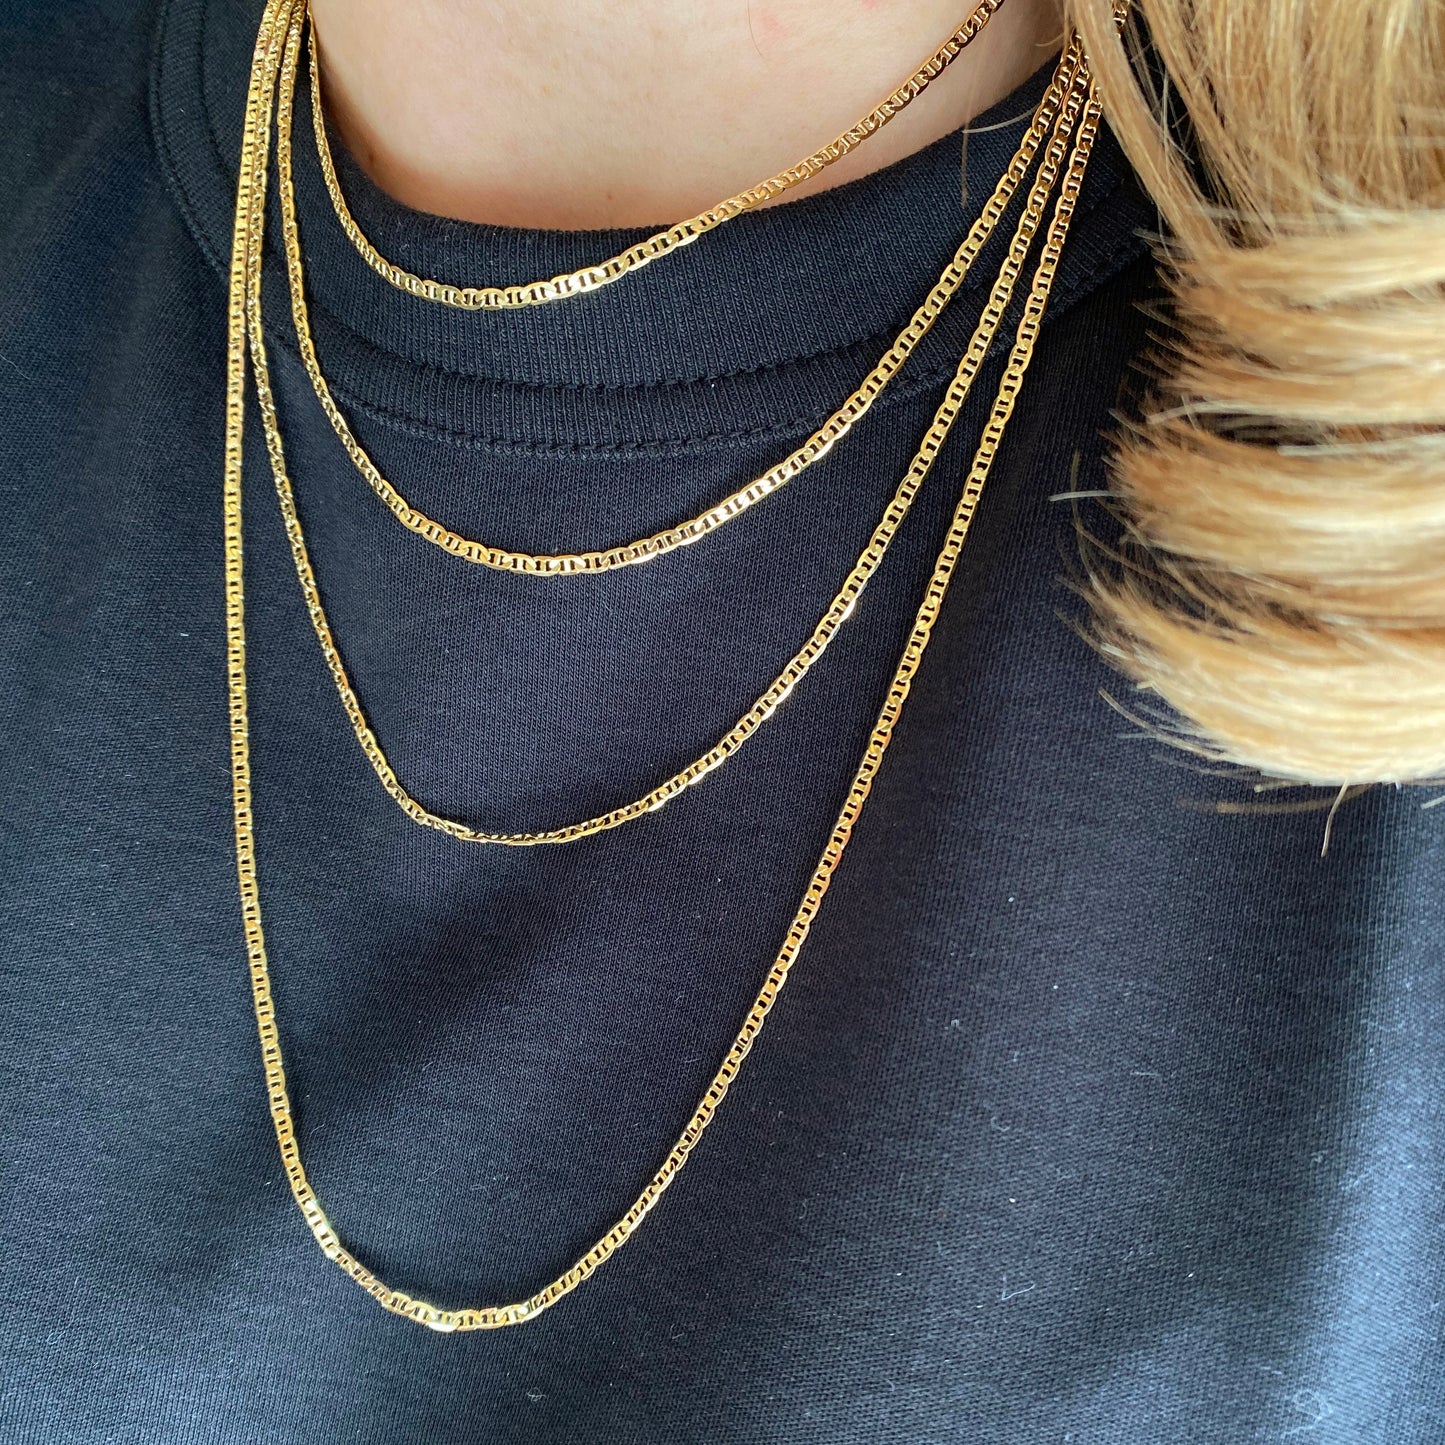 18k Gold Filled 2mm Flat Mariner Chain